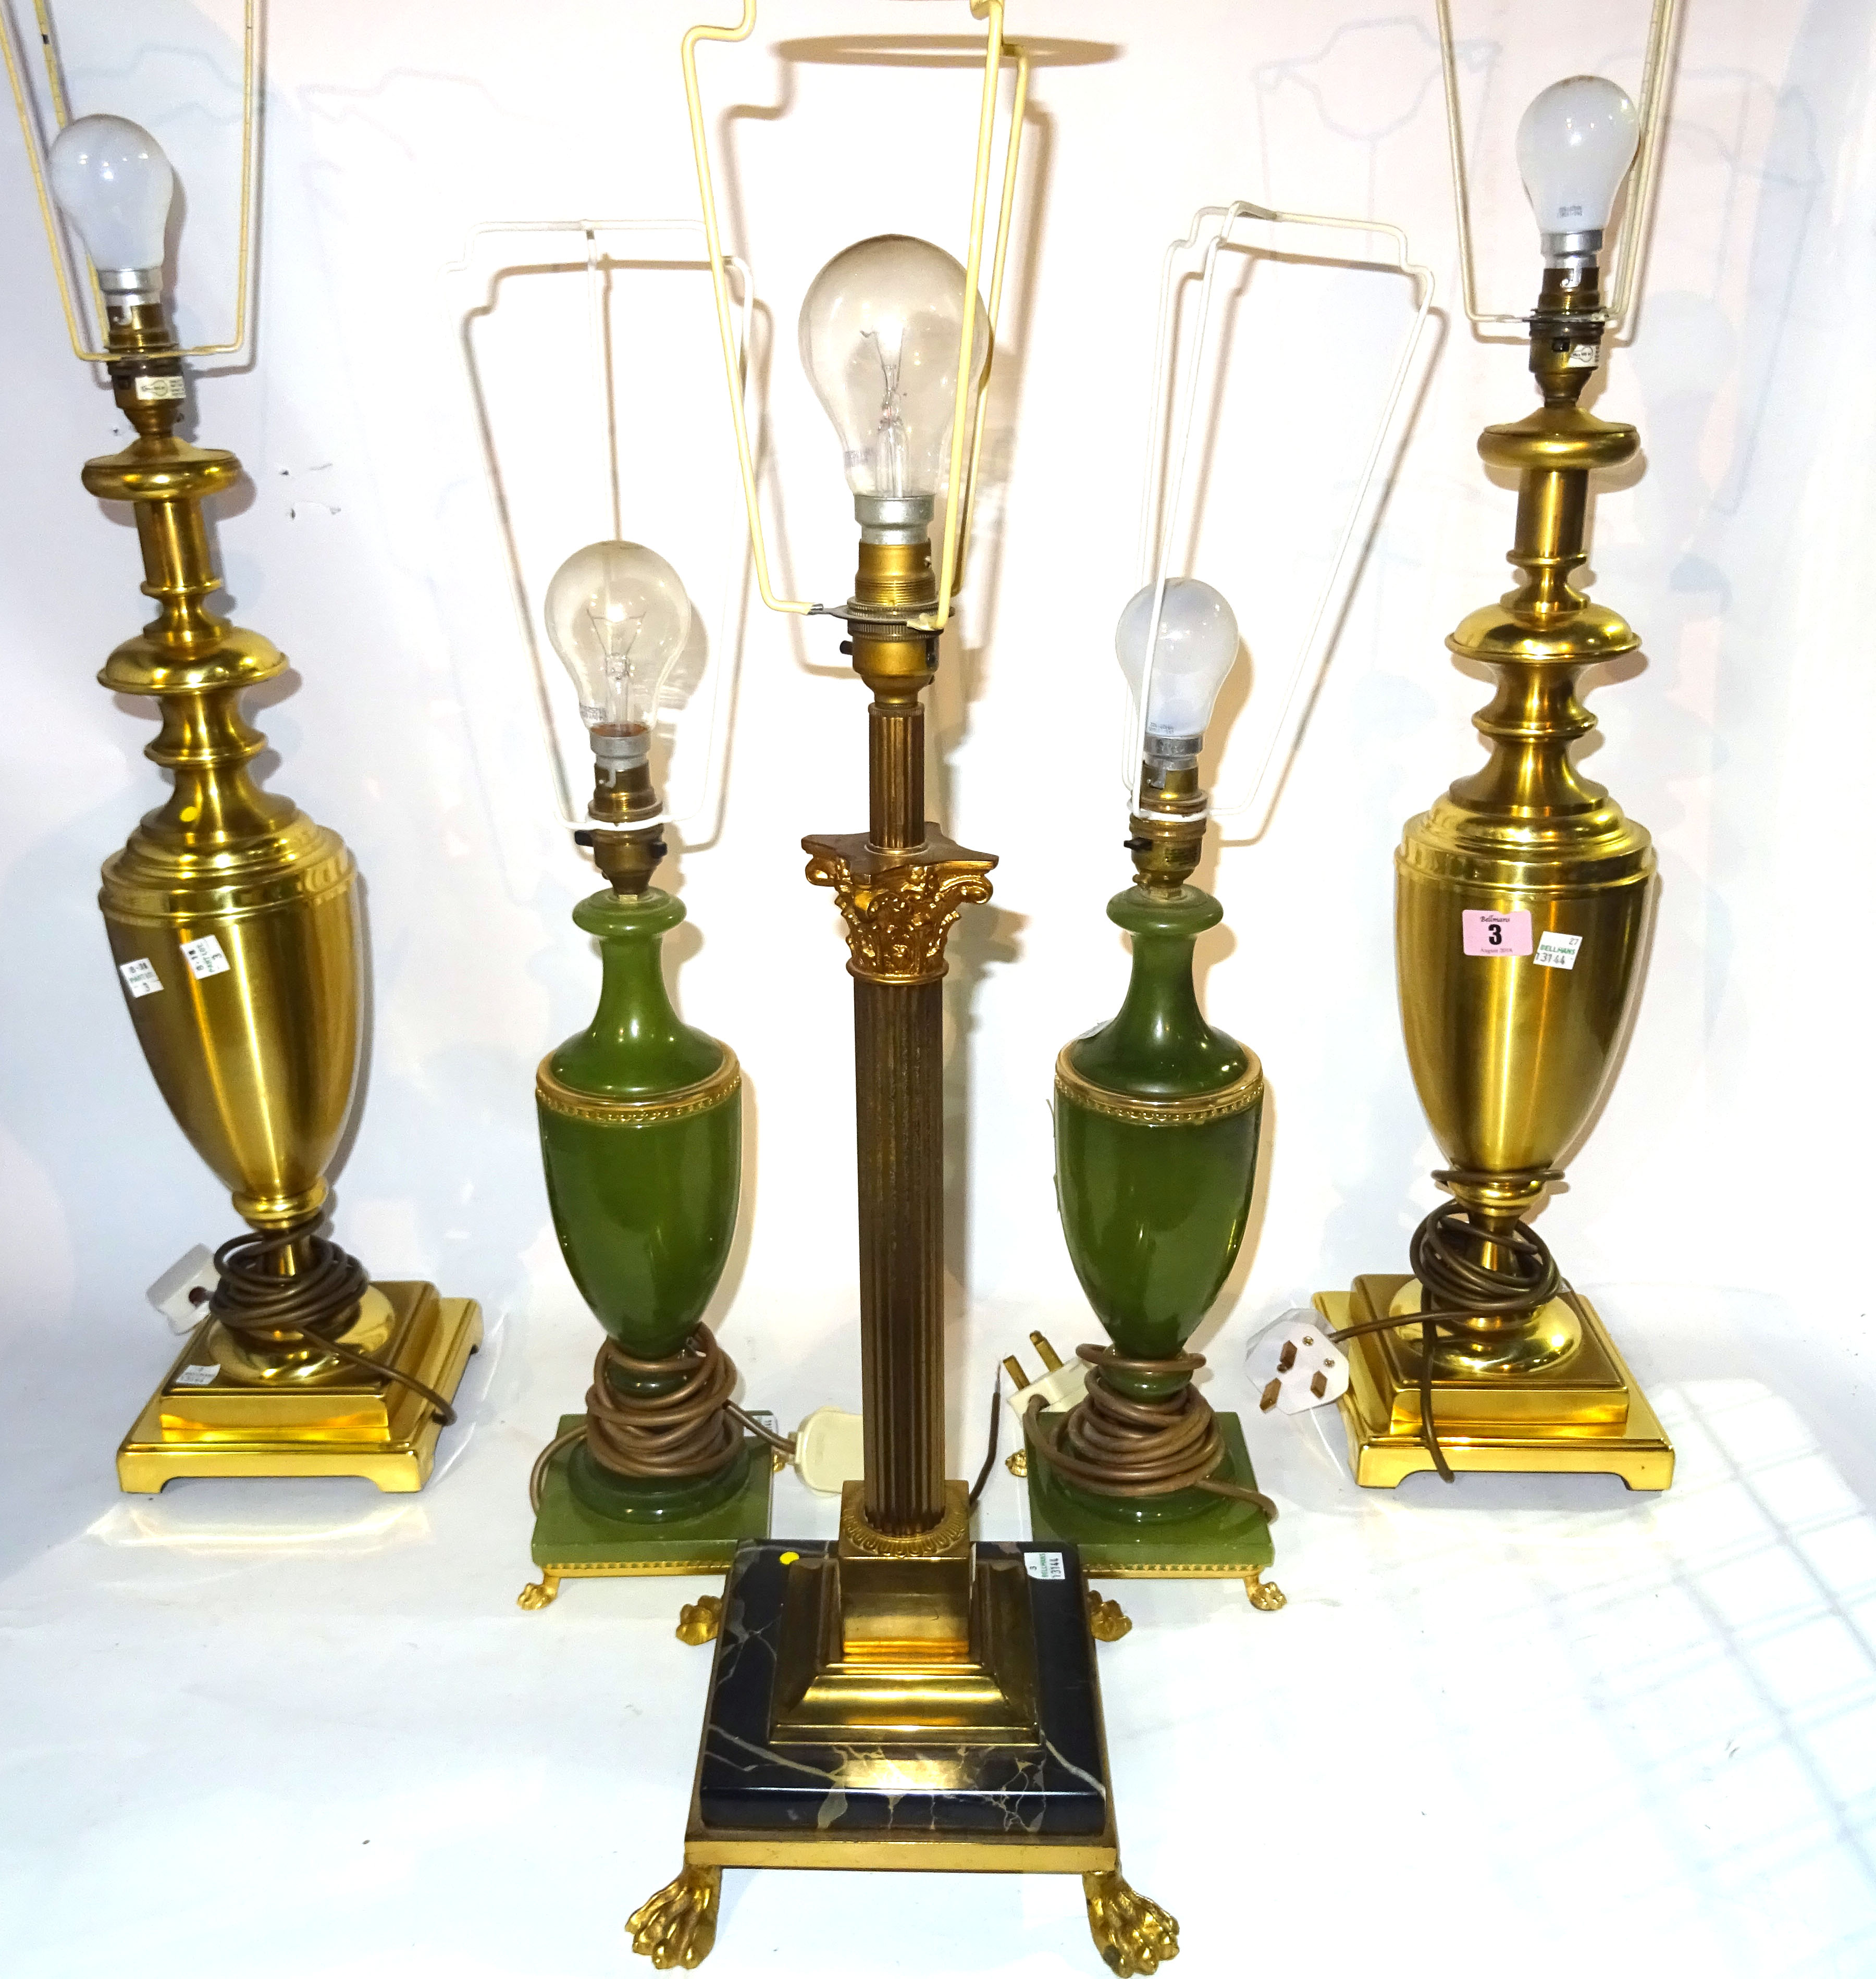 Lighting comprising; 20th century table lamps, a pair of brass urn shaped lamps, 50cm high, a pair of green glass urn shaped lamps, 40cm high and a gi